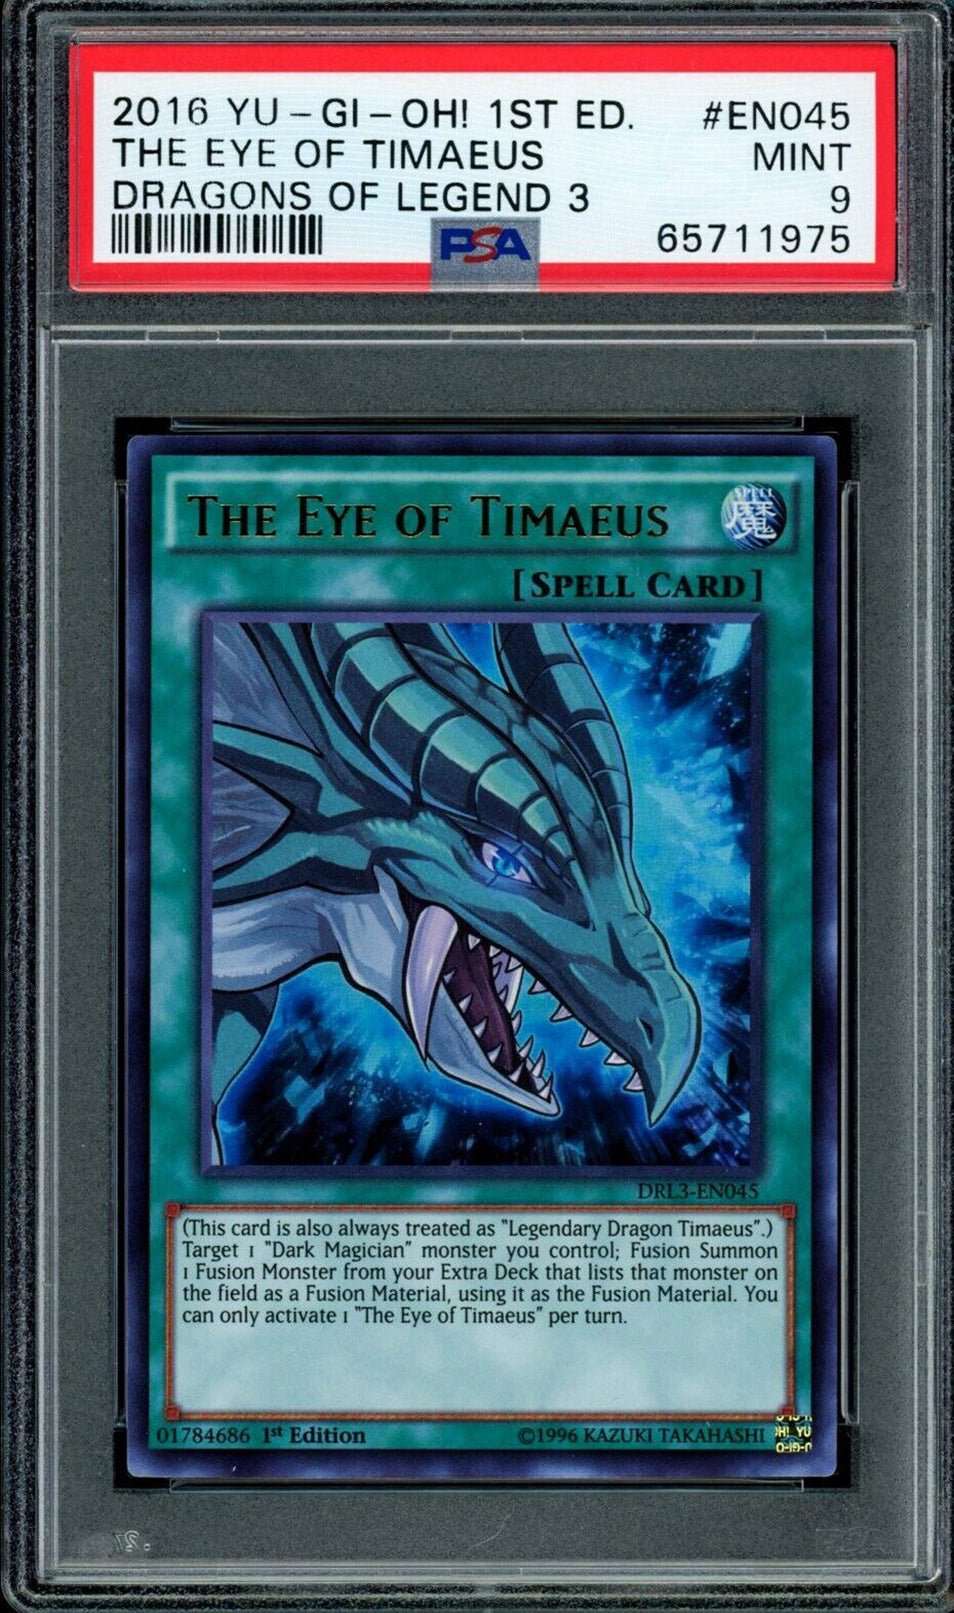 THE EYE OF TIMAEUS DRL3-EN045 Ultra Rare PSA 9 2016 Dragons of Legend 3 1st Edition C1 Yu-Gi-Oh Base Graded Cards - Hobby Gems